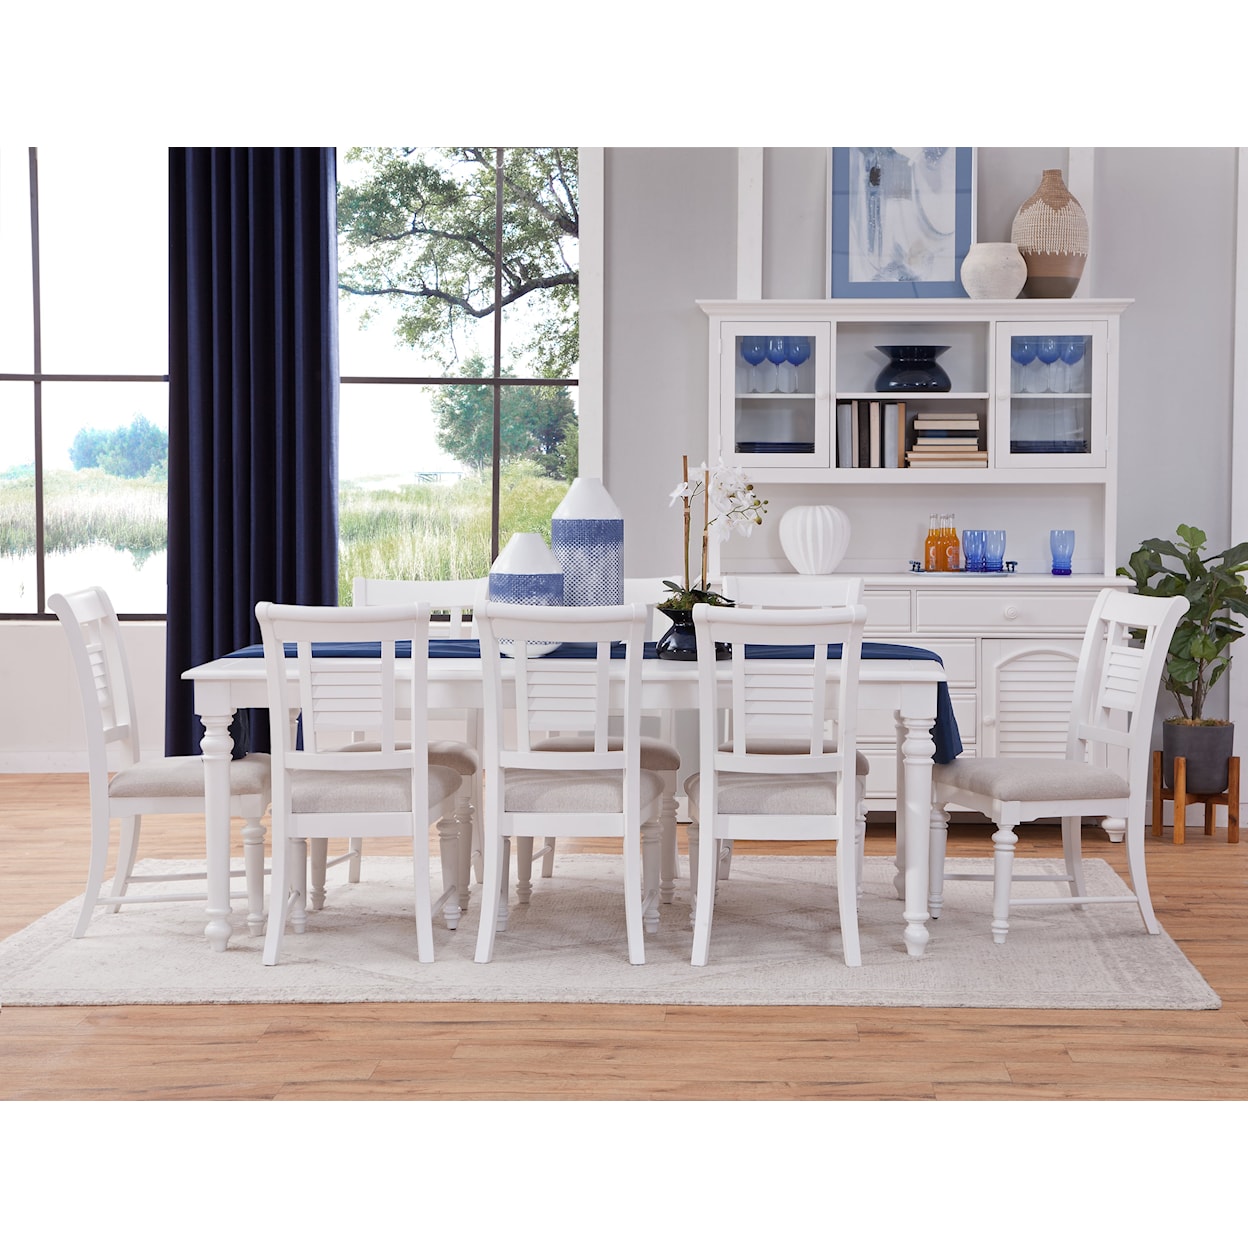 American Woodcrafters Cottage Traditions Dining Table Set